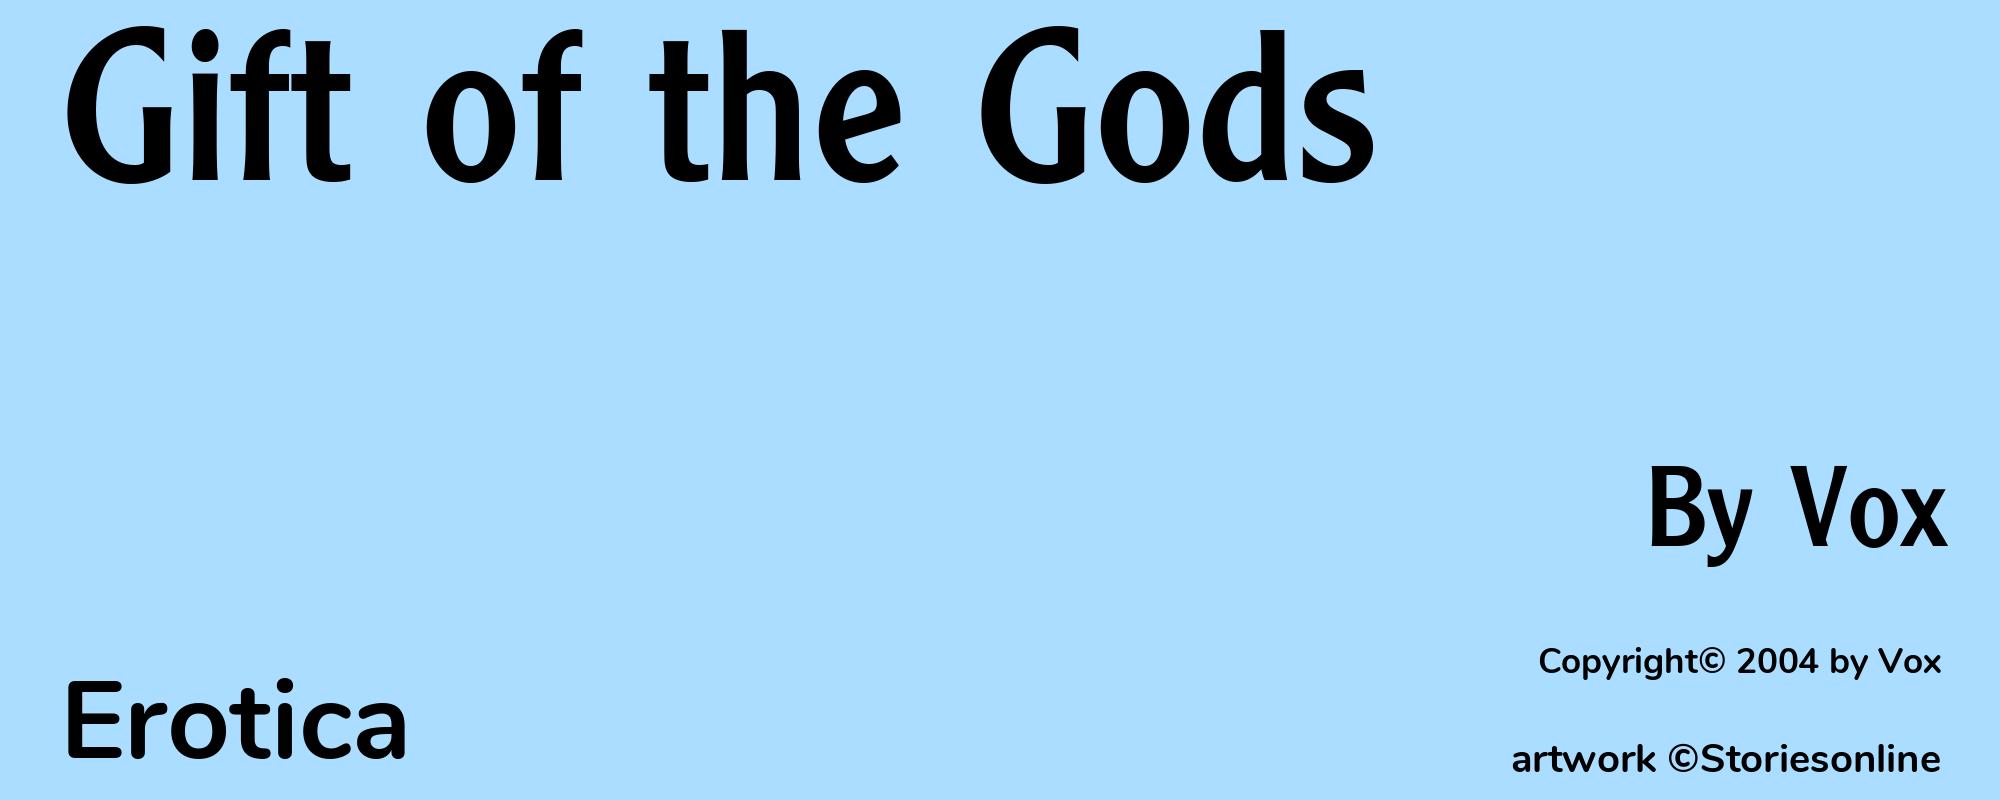 Gift of the Gods - Cover